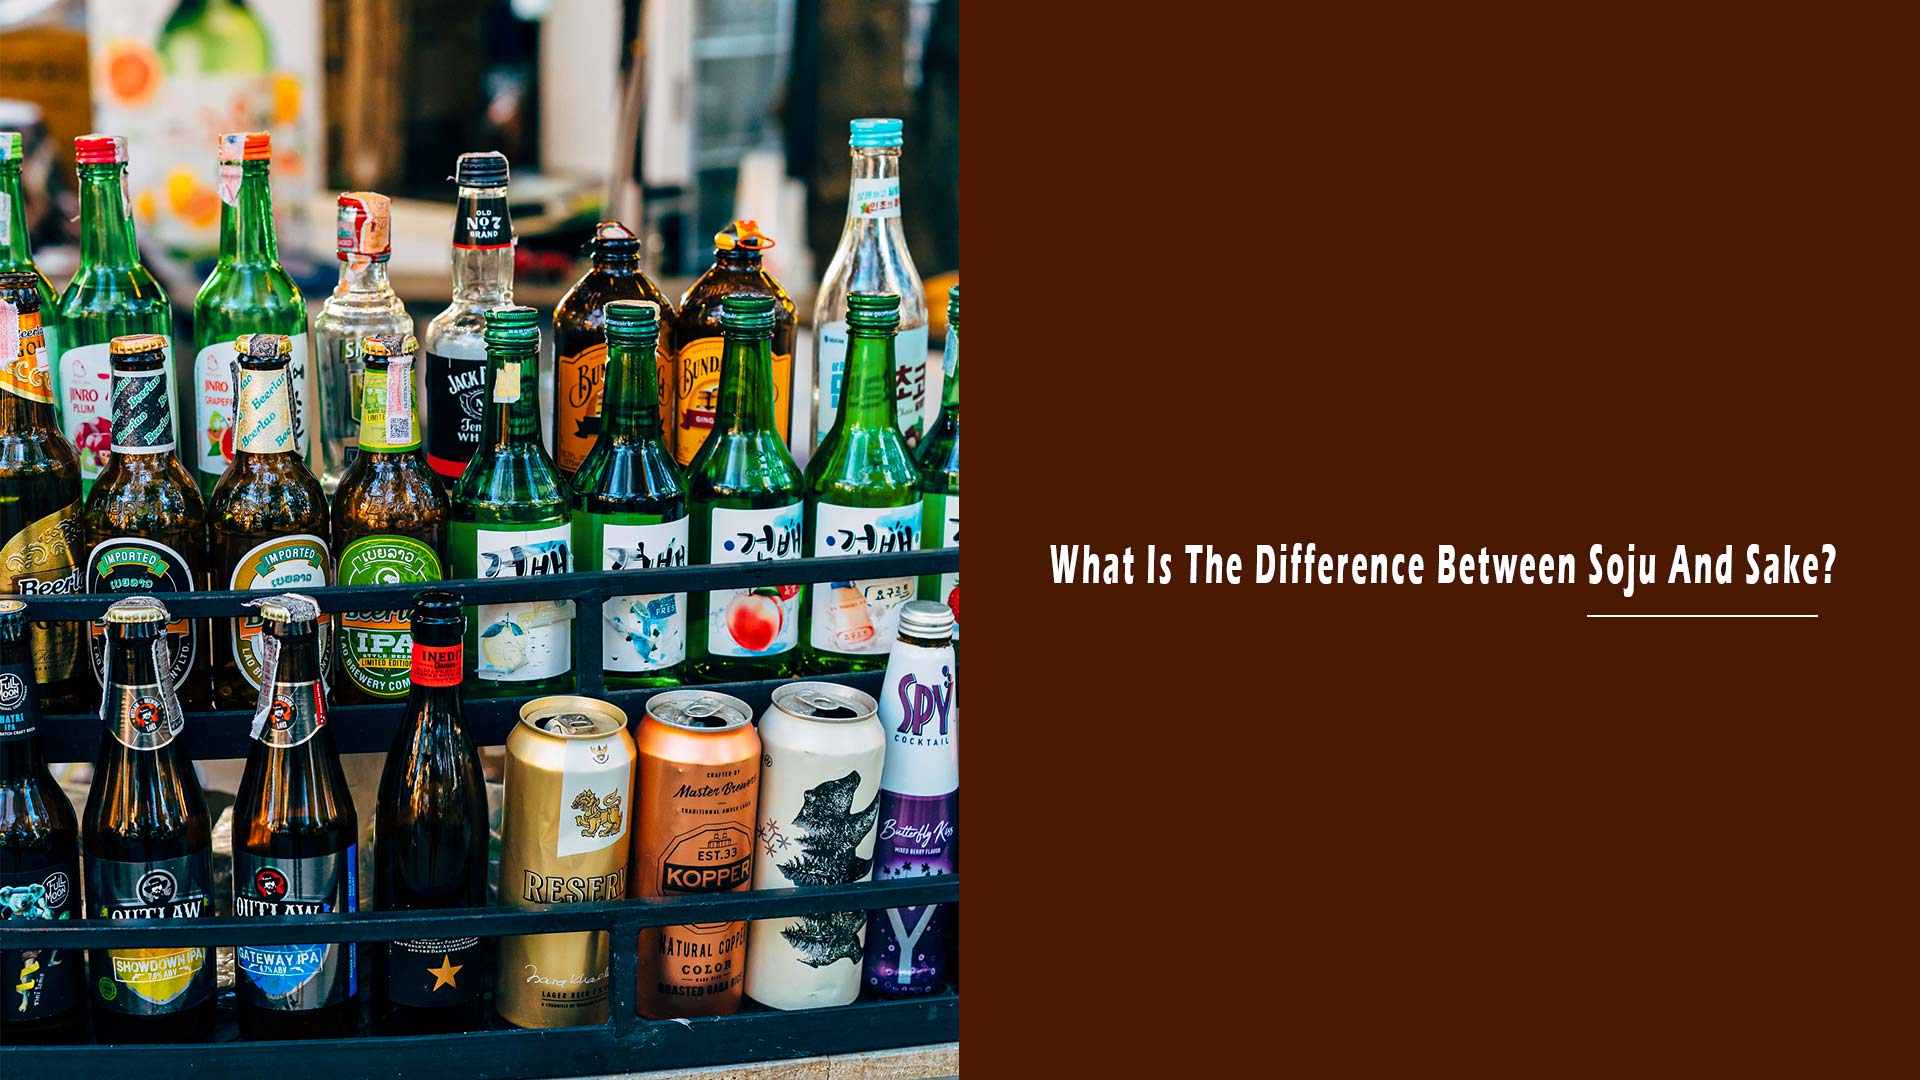 What Is The Difference Between Soju And Sake